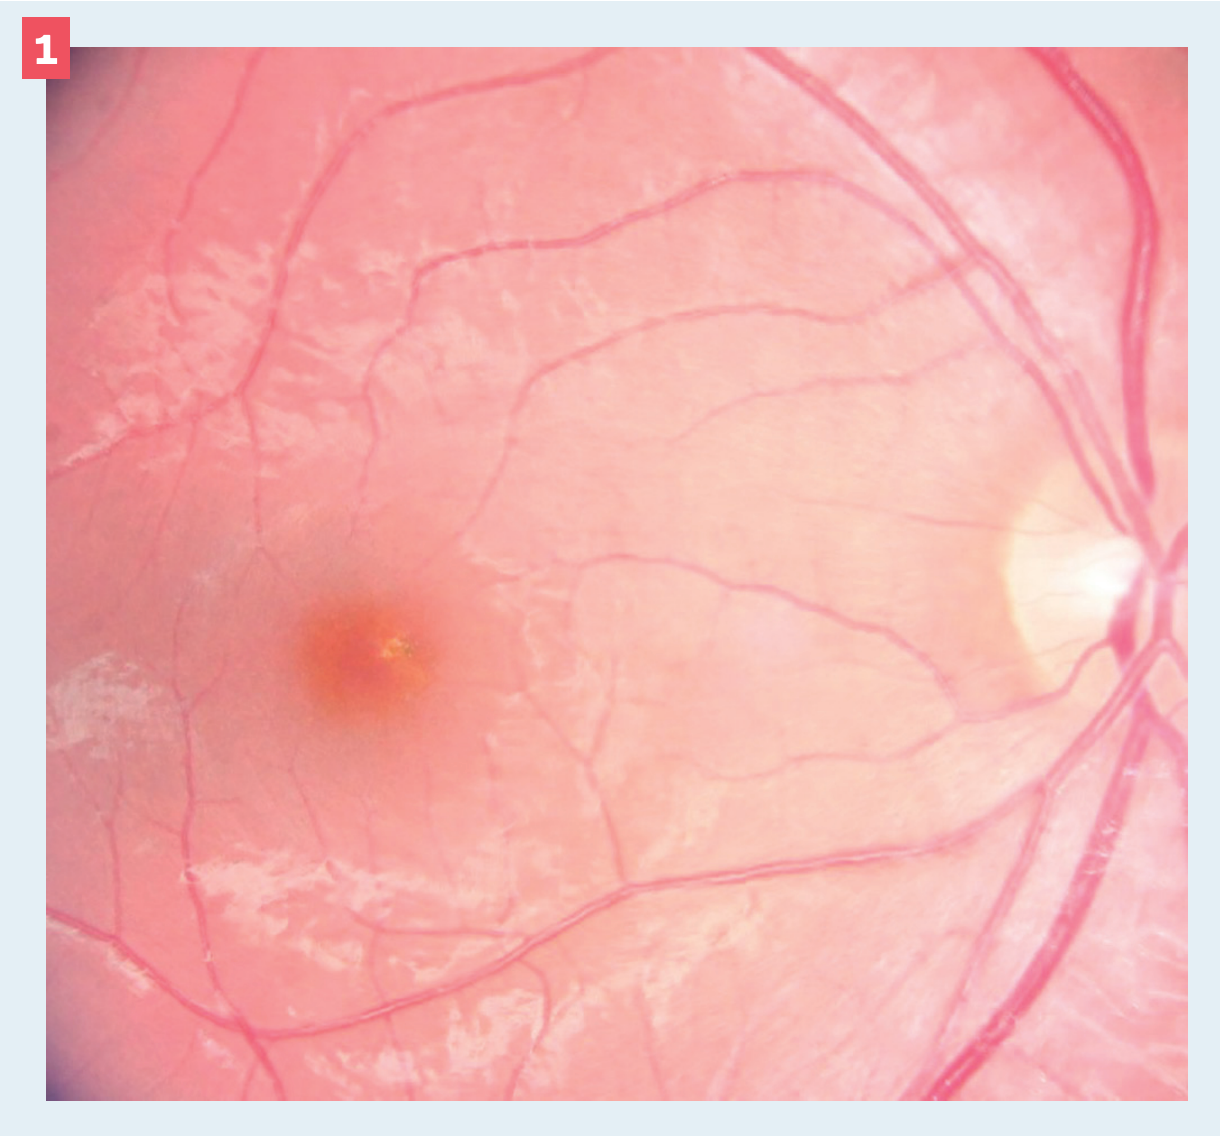 Figure 1. Color fundus photo of the right eye